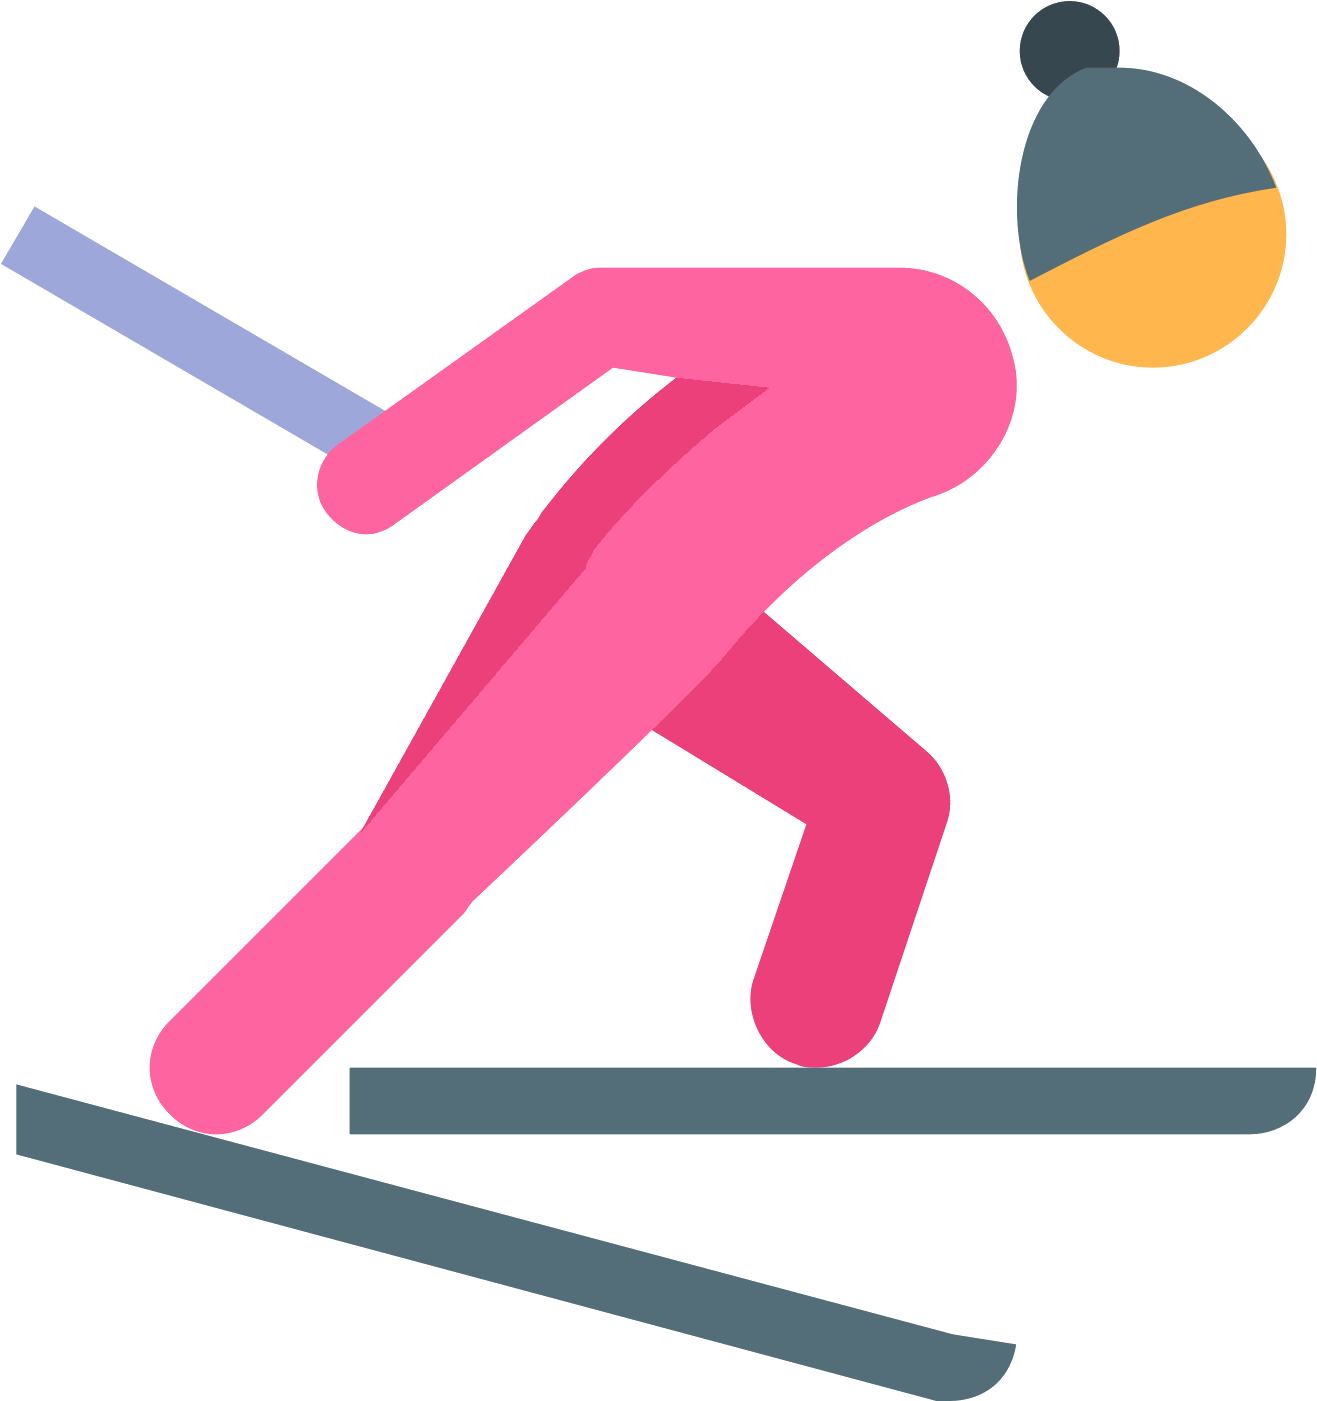 1600 X 1600 4 - Cross Country Skiing Icon (1600x1600)